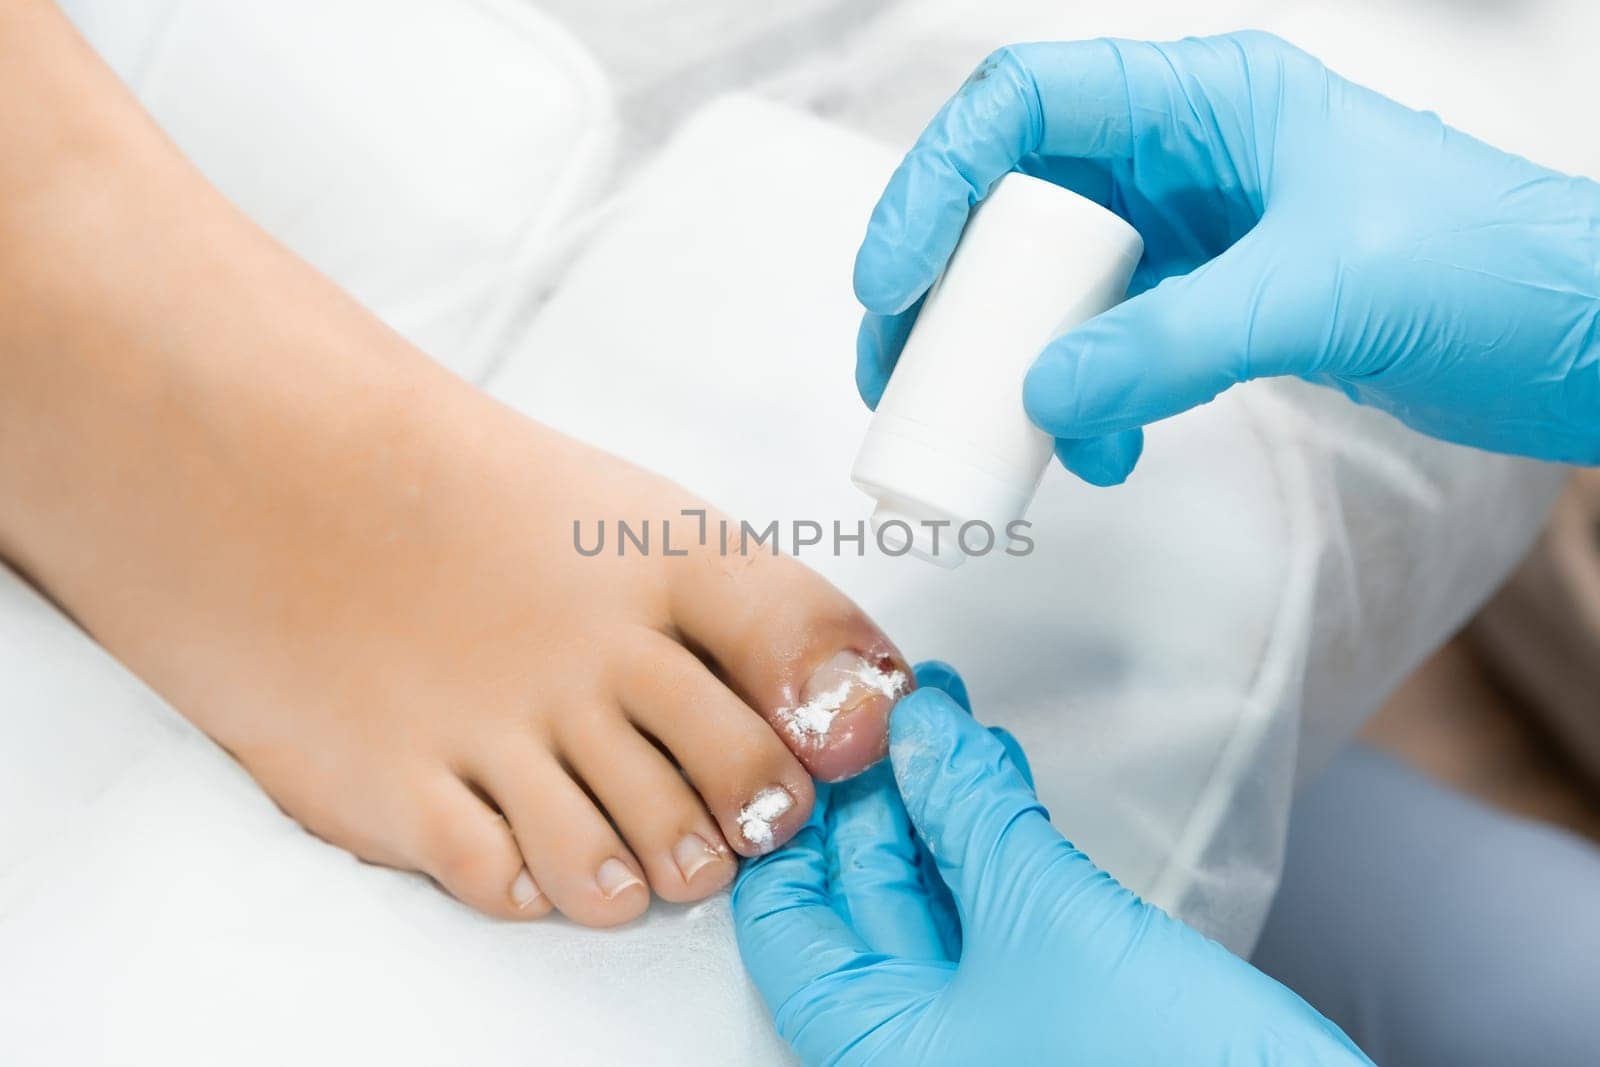 The foot specialist administers a dusty disinfectant to the toe following the extraction of the nail by vladimka